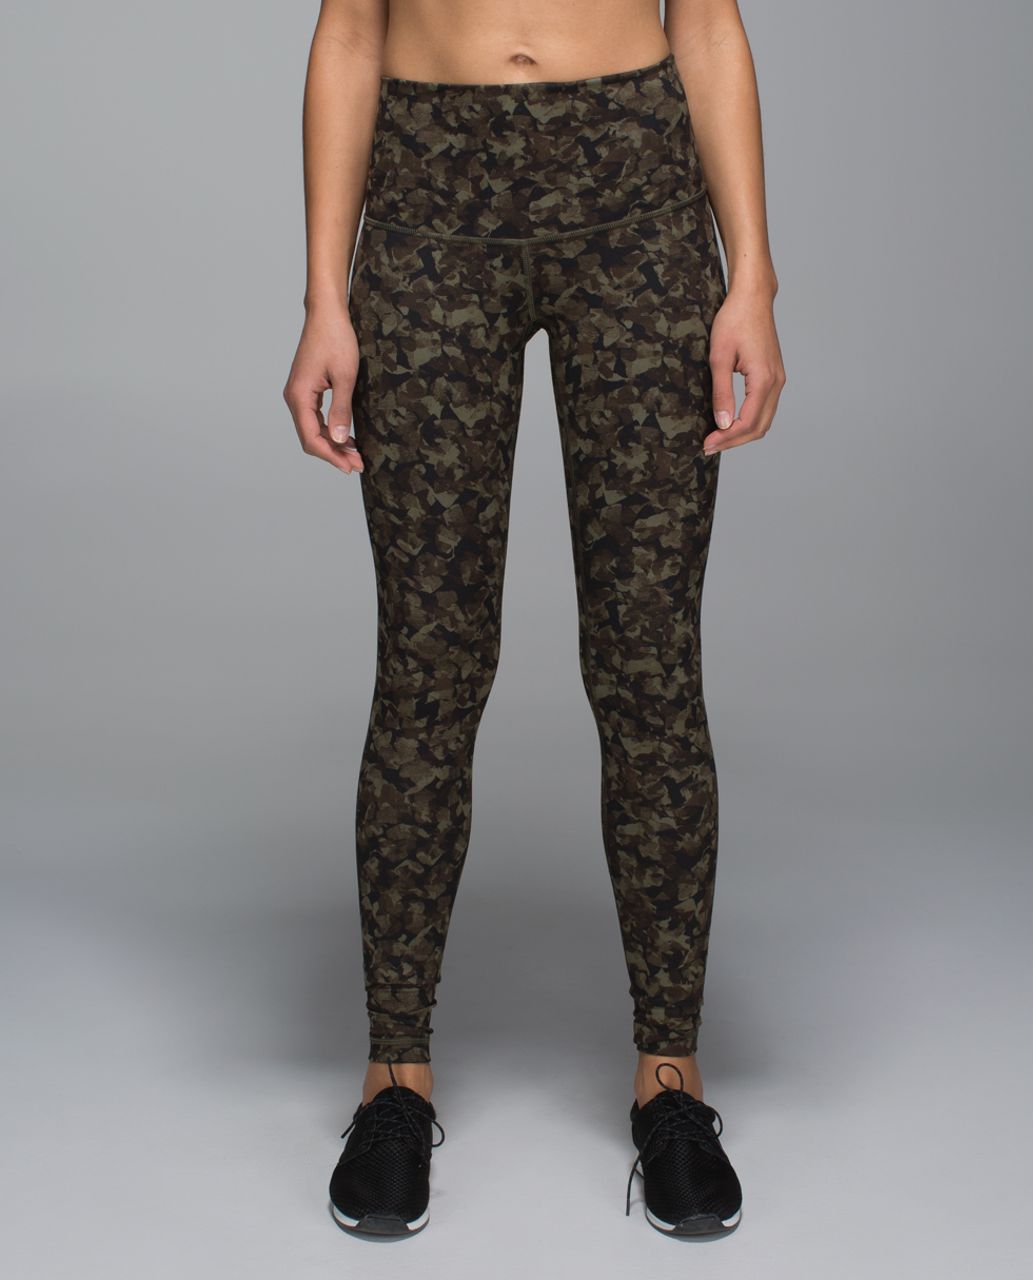 Lululemon Wunder Under Pant *Full-On Luon (Roll Down) - Mystic Jungle Fatigue Green Black